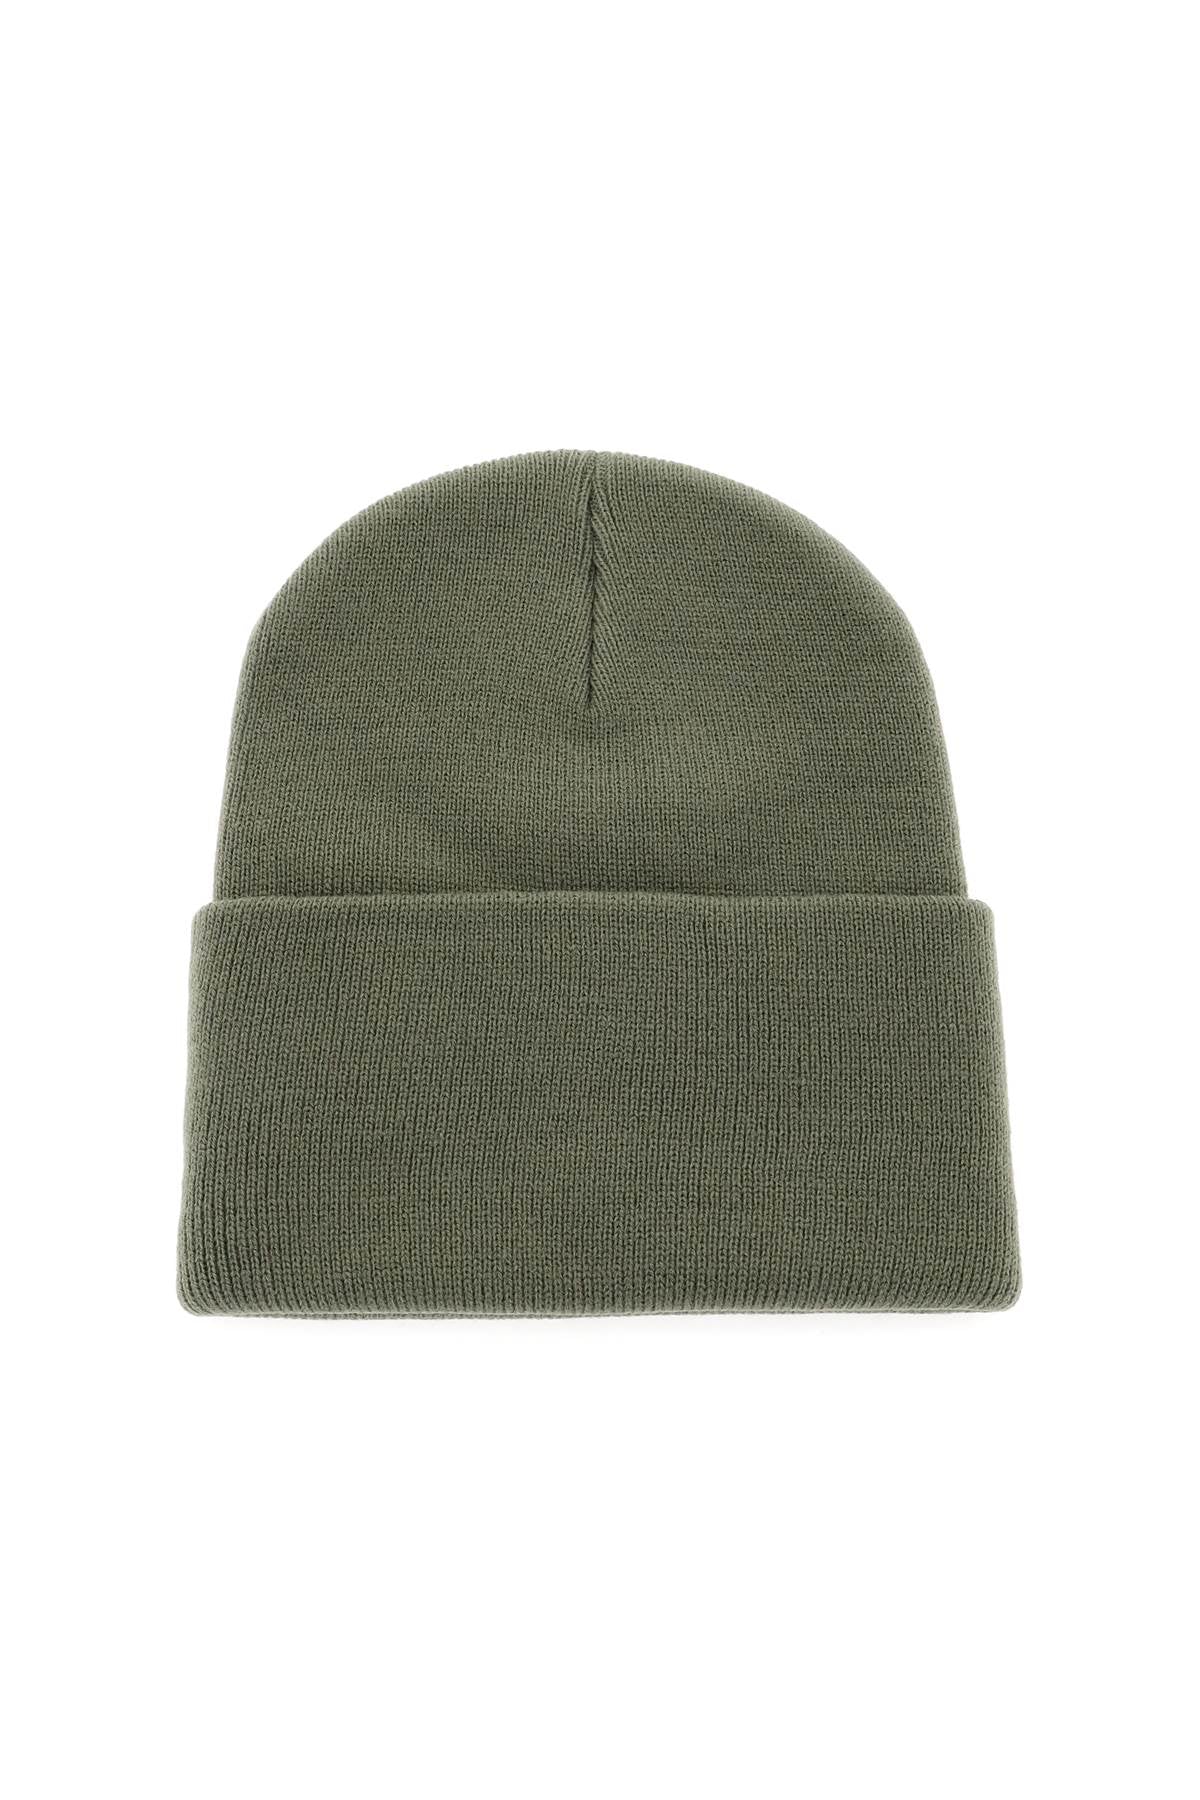 Carhartt Wip Beanie Hat With Logo Patch   Green